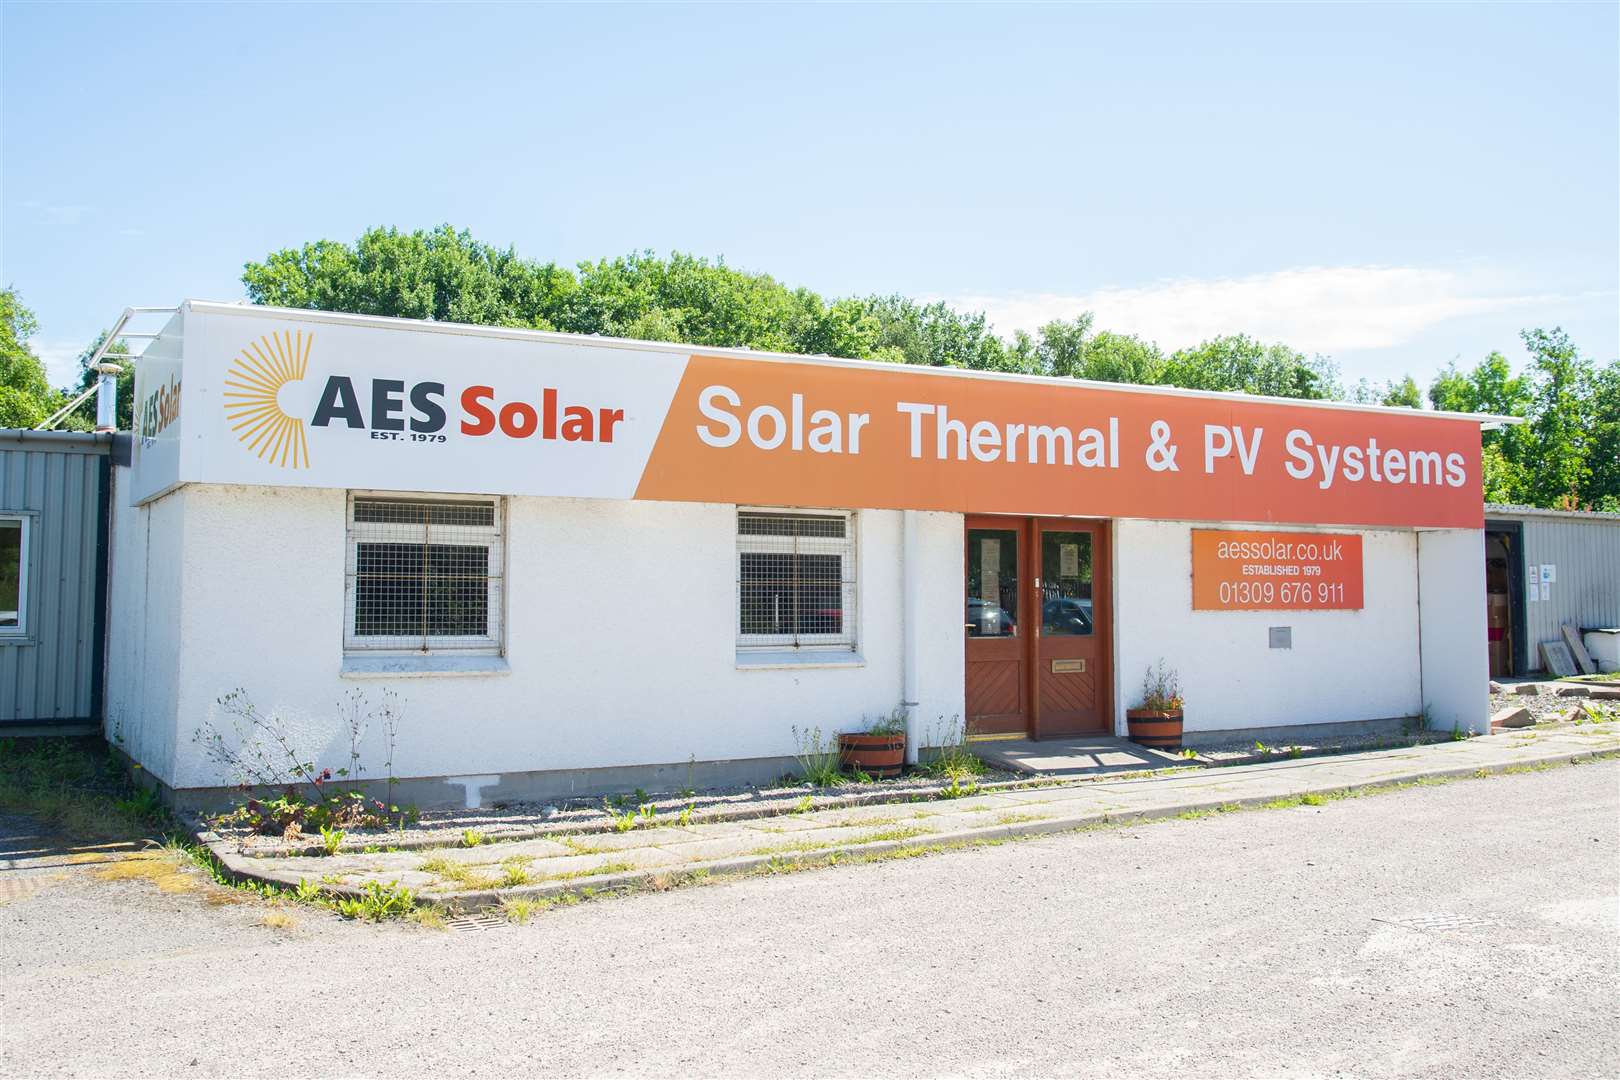 AES Solar in Forres. Picture: Daniel Forsyth